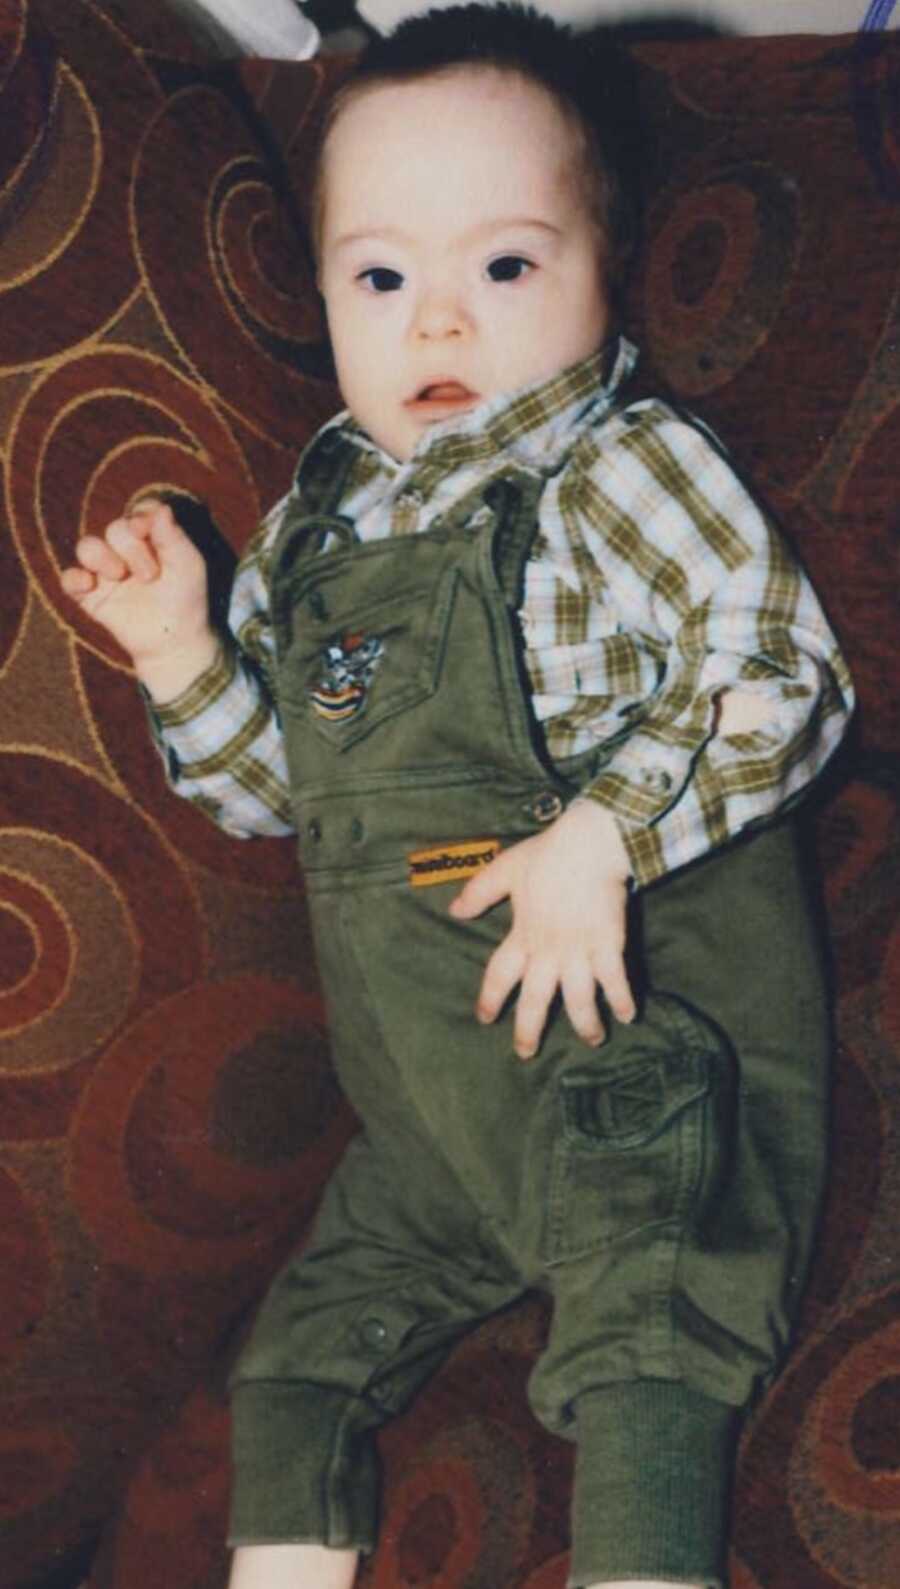 adopted son with Down syndrome wearing green overalls